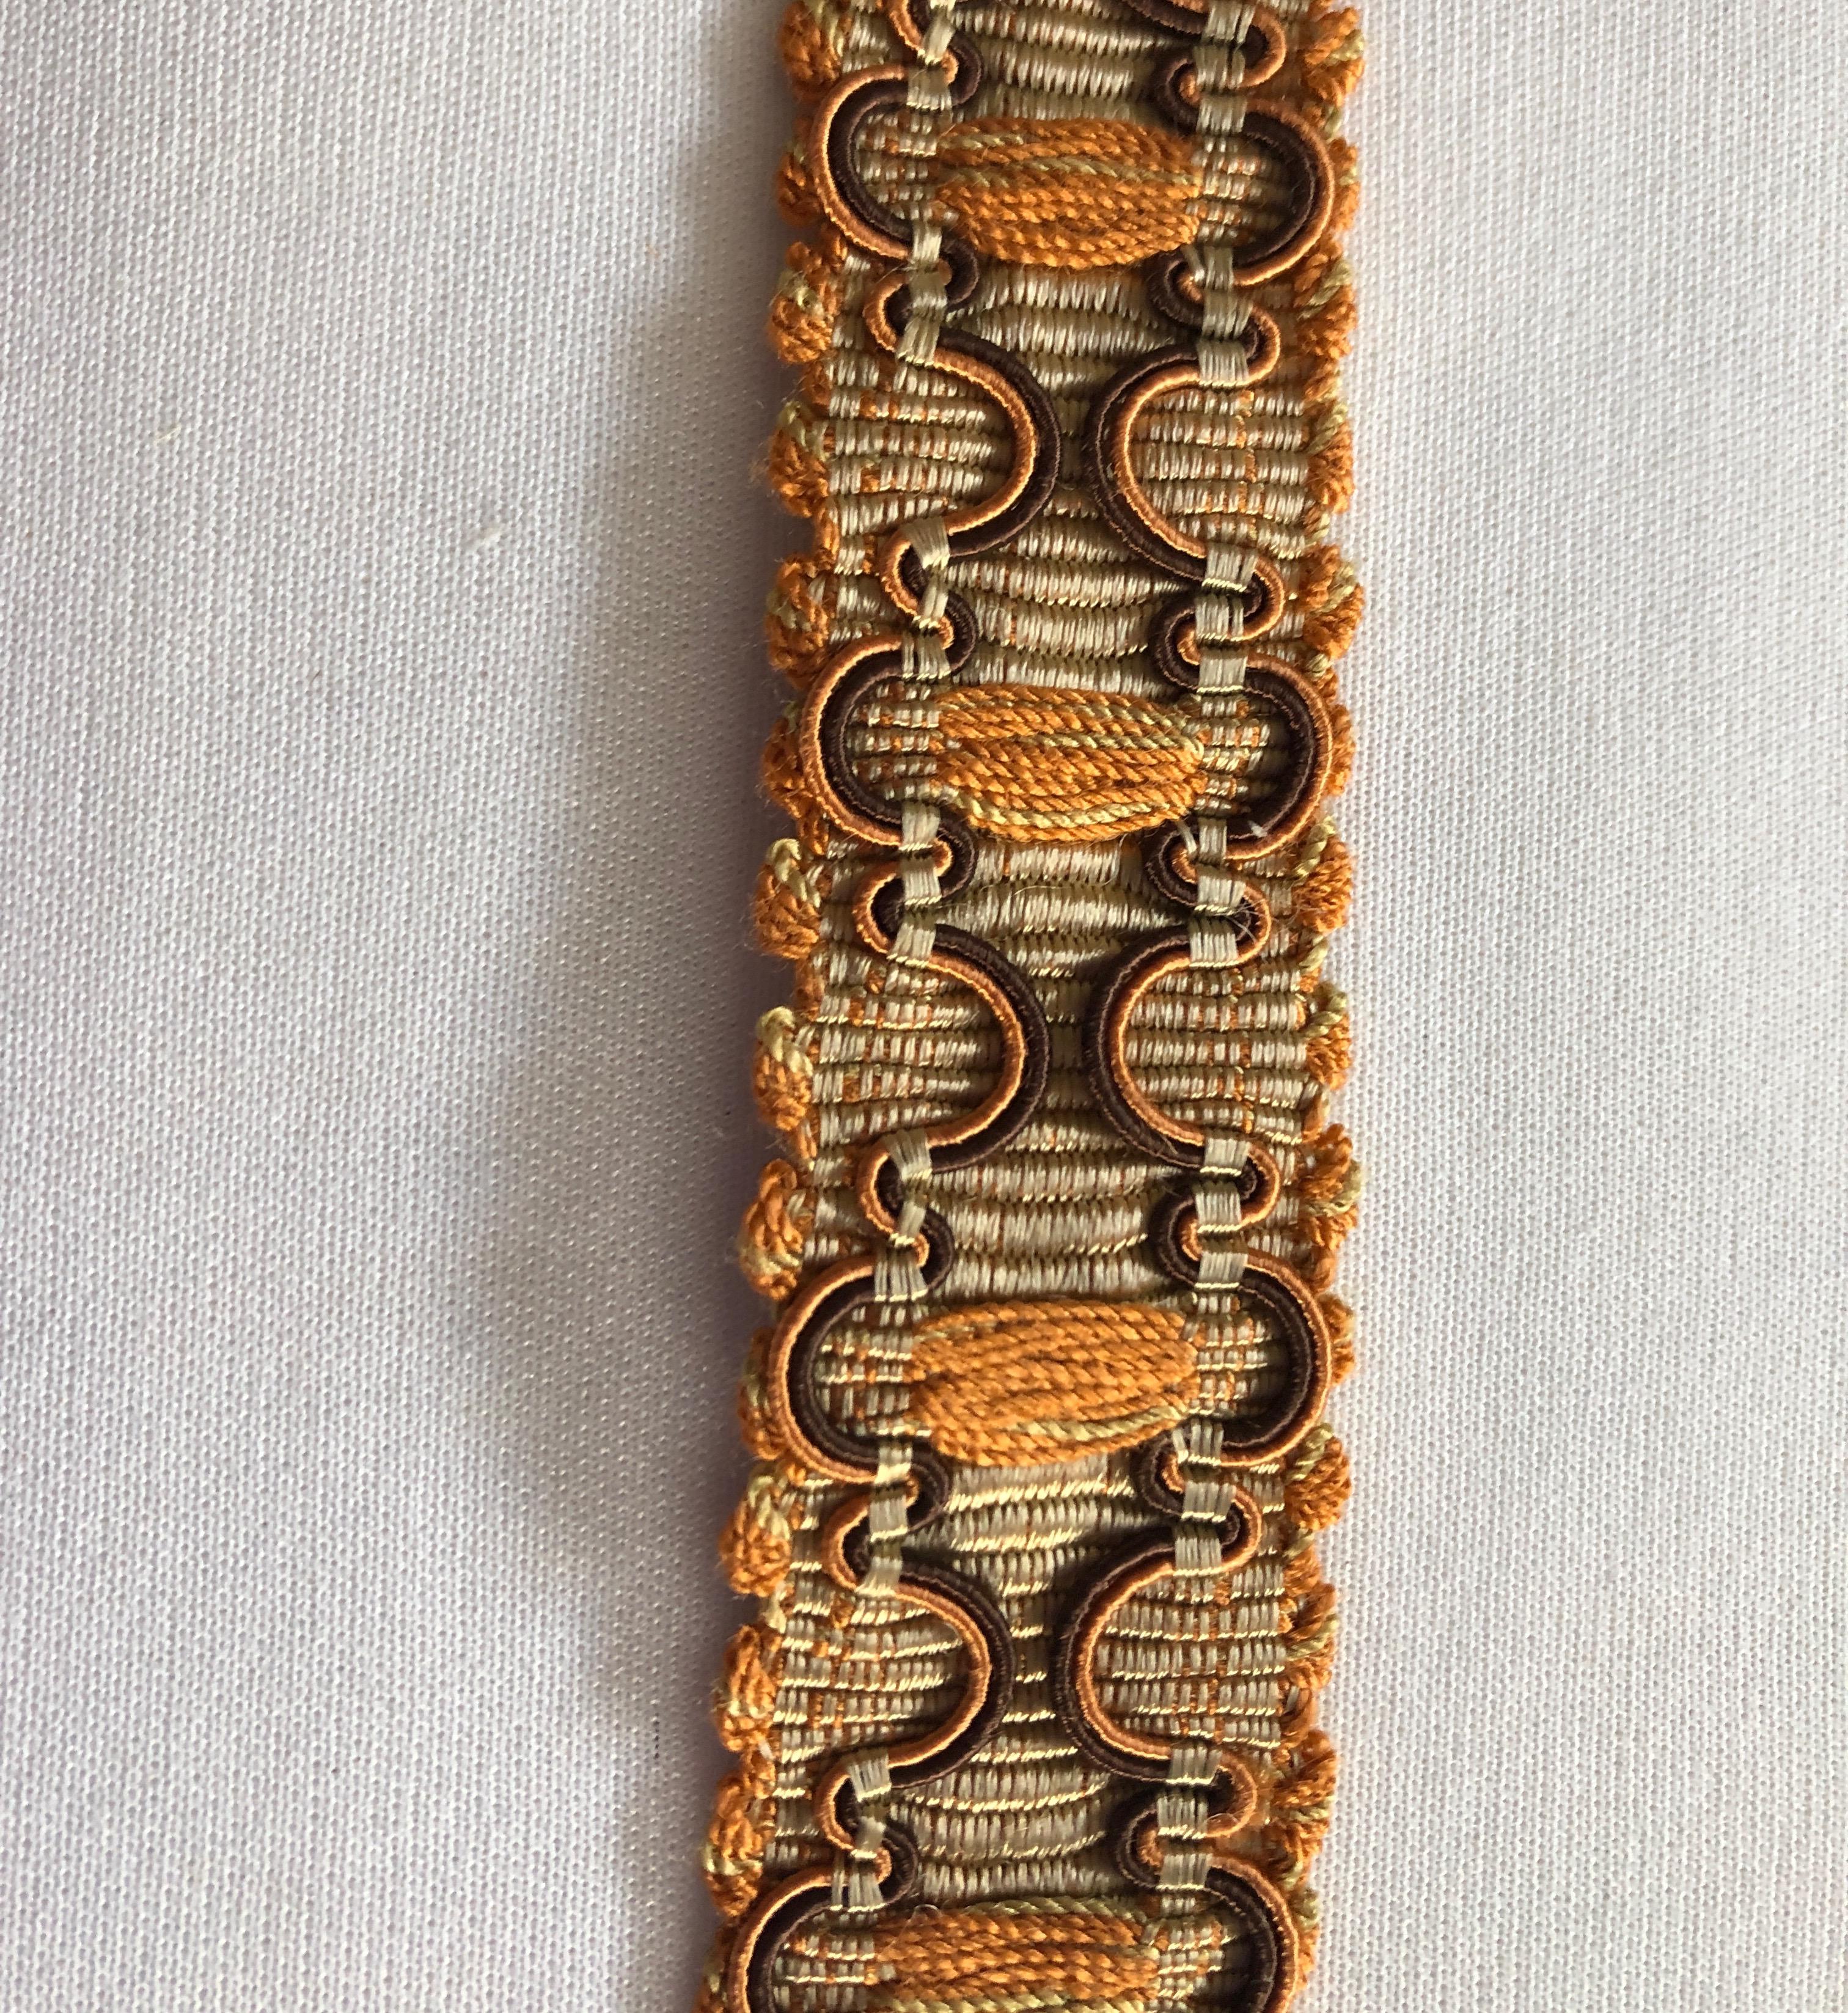 Vintage orange and brown braided gimp silk decorative trim.
Ideal for pillows, curtains and upholstery.
Sold as is.
Size: 1